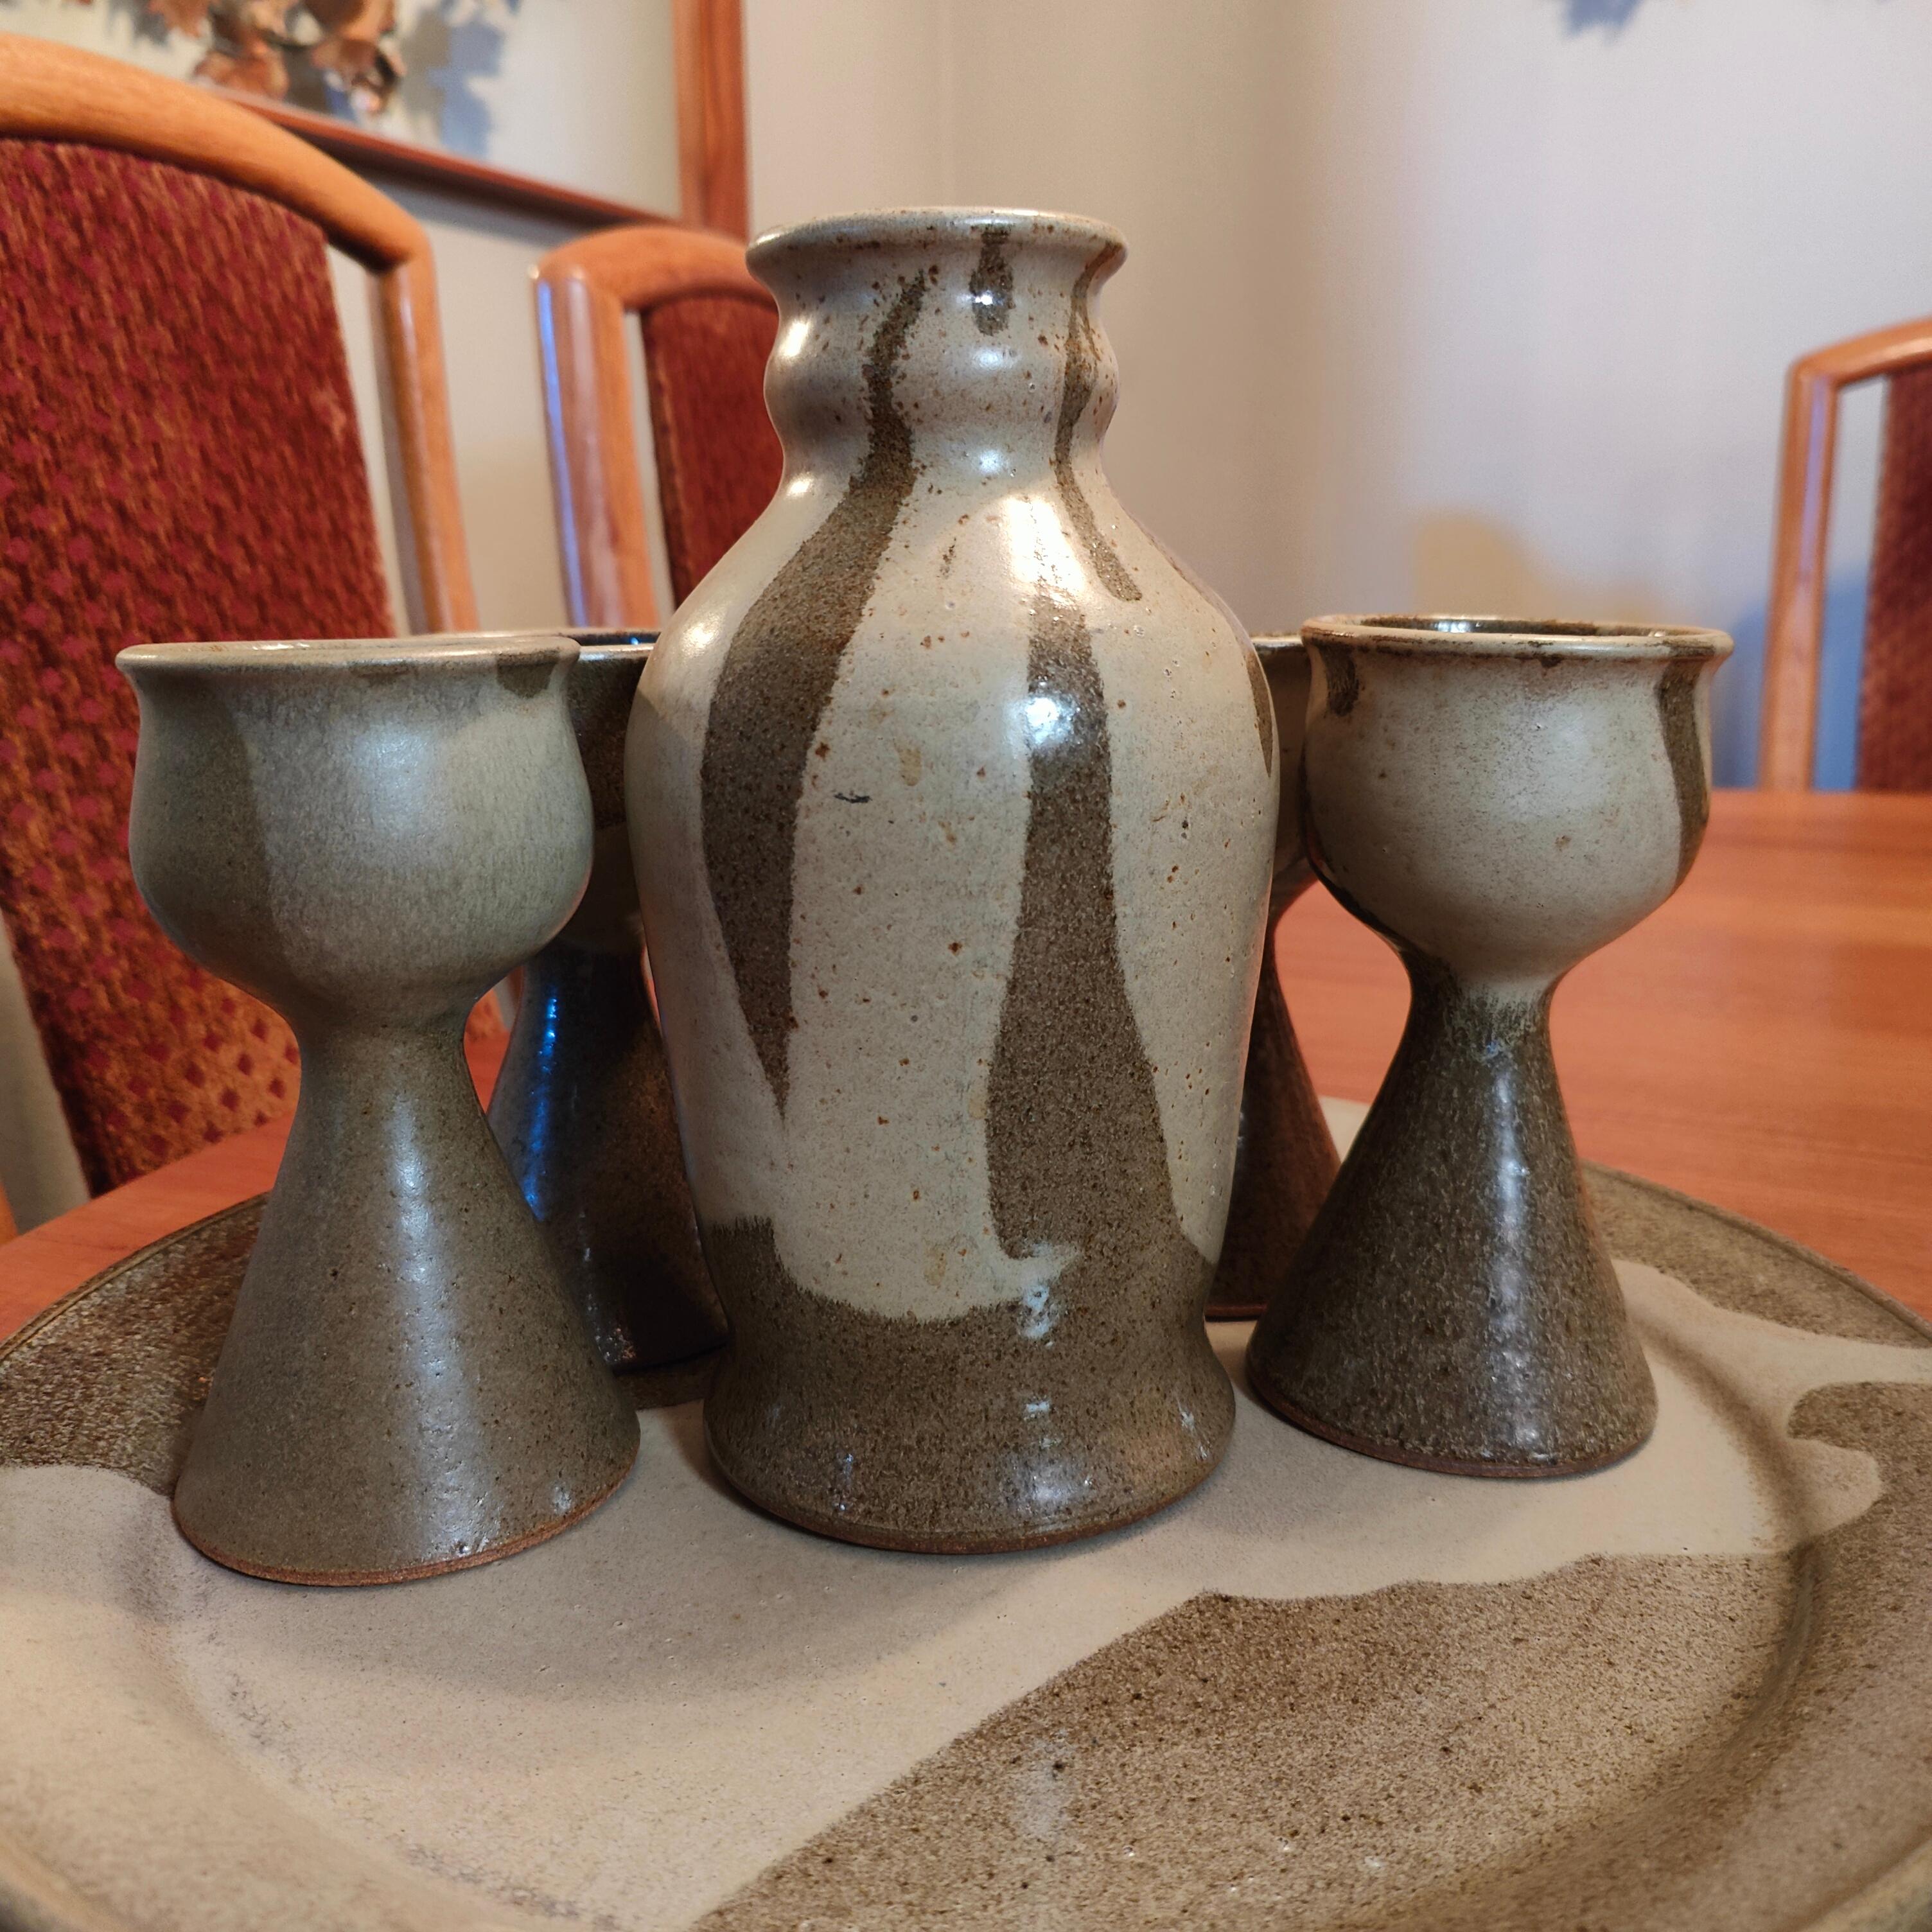 Just in is a beautiful studio made ceramic wine set. This set includes 1 charger plate, 1 pourer, and 8 goblets. Measurements: Charger plate: 16 inches wide x 1 inch tall; wine pourer: 9.25t x 5 inches wide (at widest point); goblets: approximately